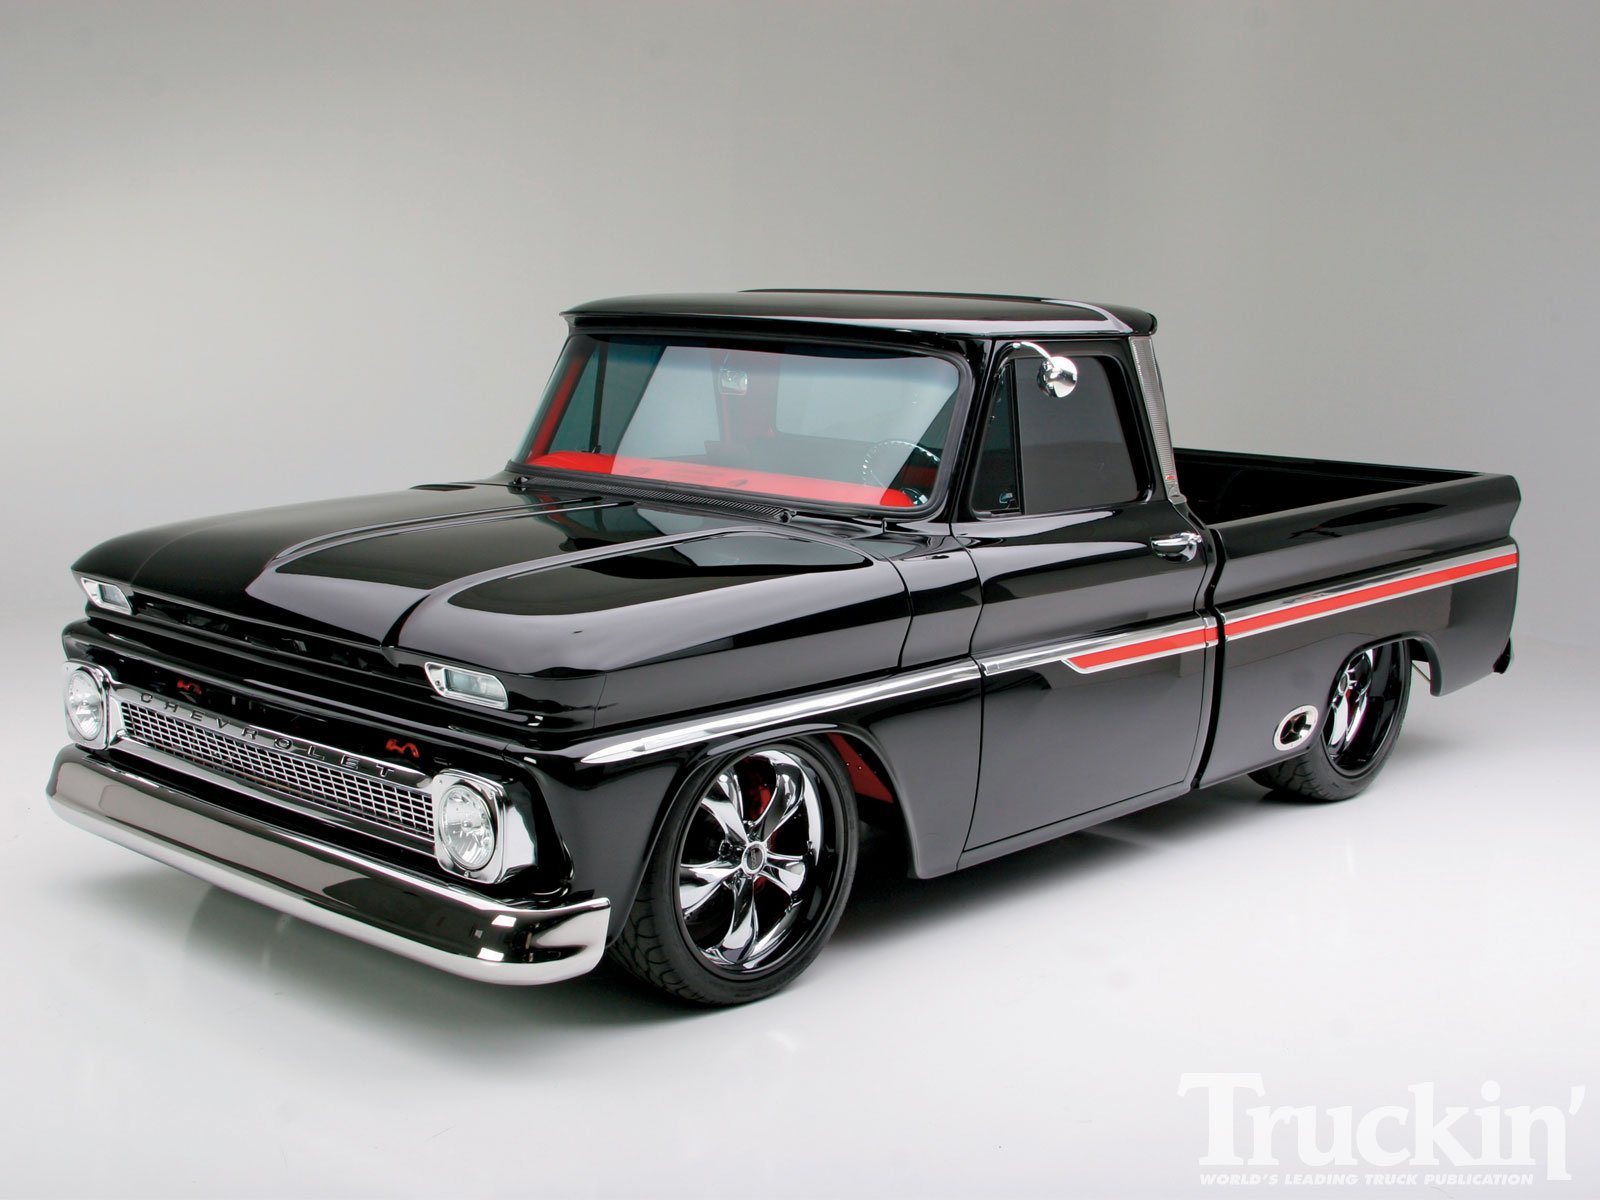 Chevy Truck Wallpapers 5044 Hd Wallpapers in Cars   Imagescicom